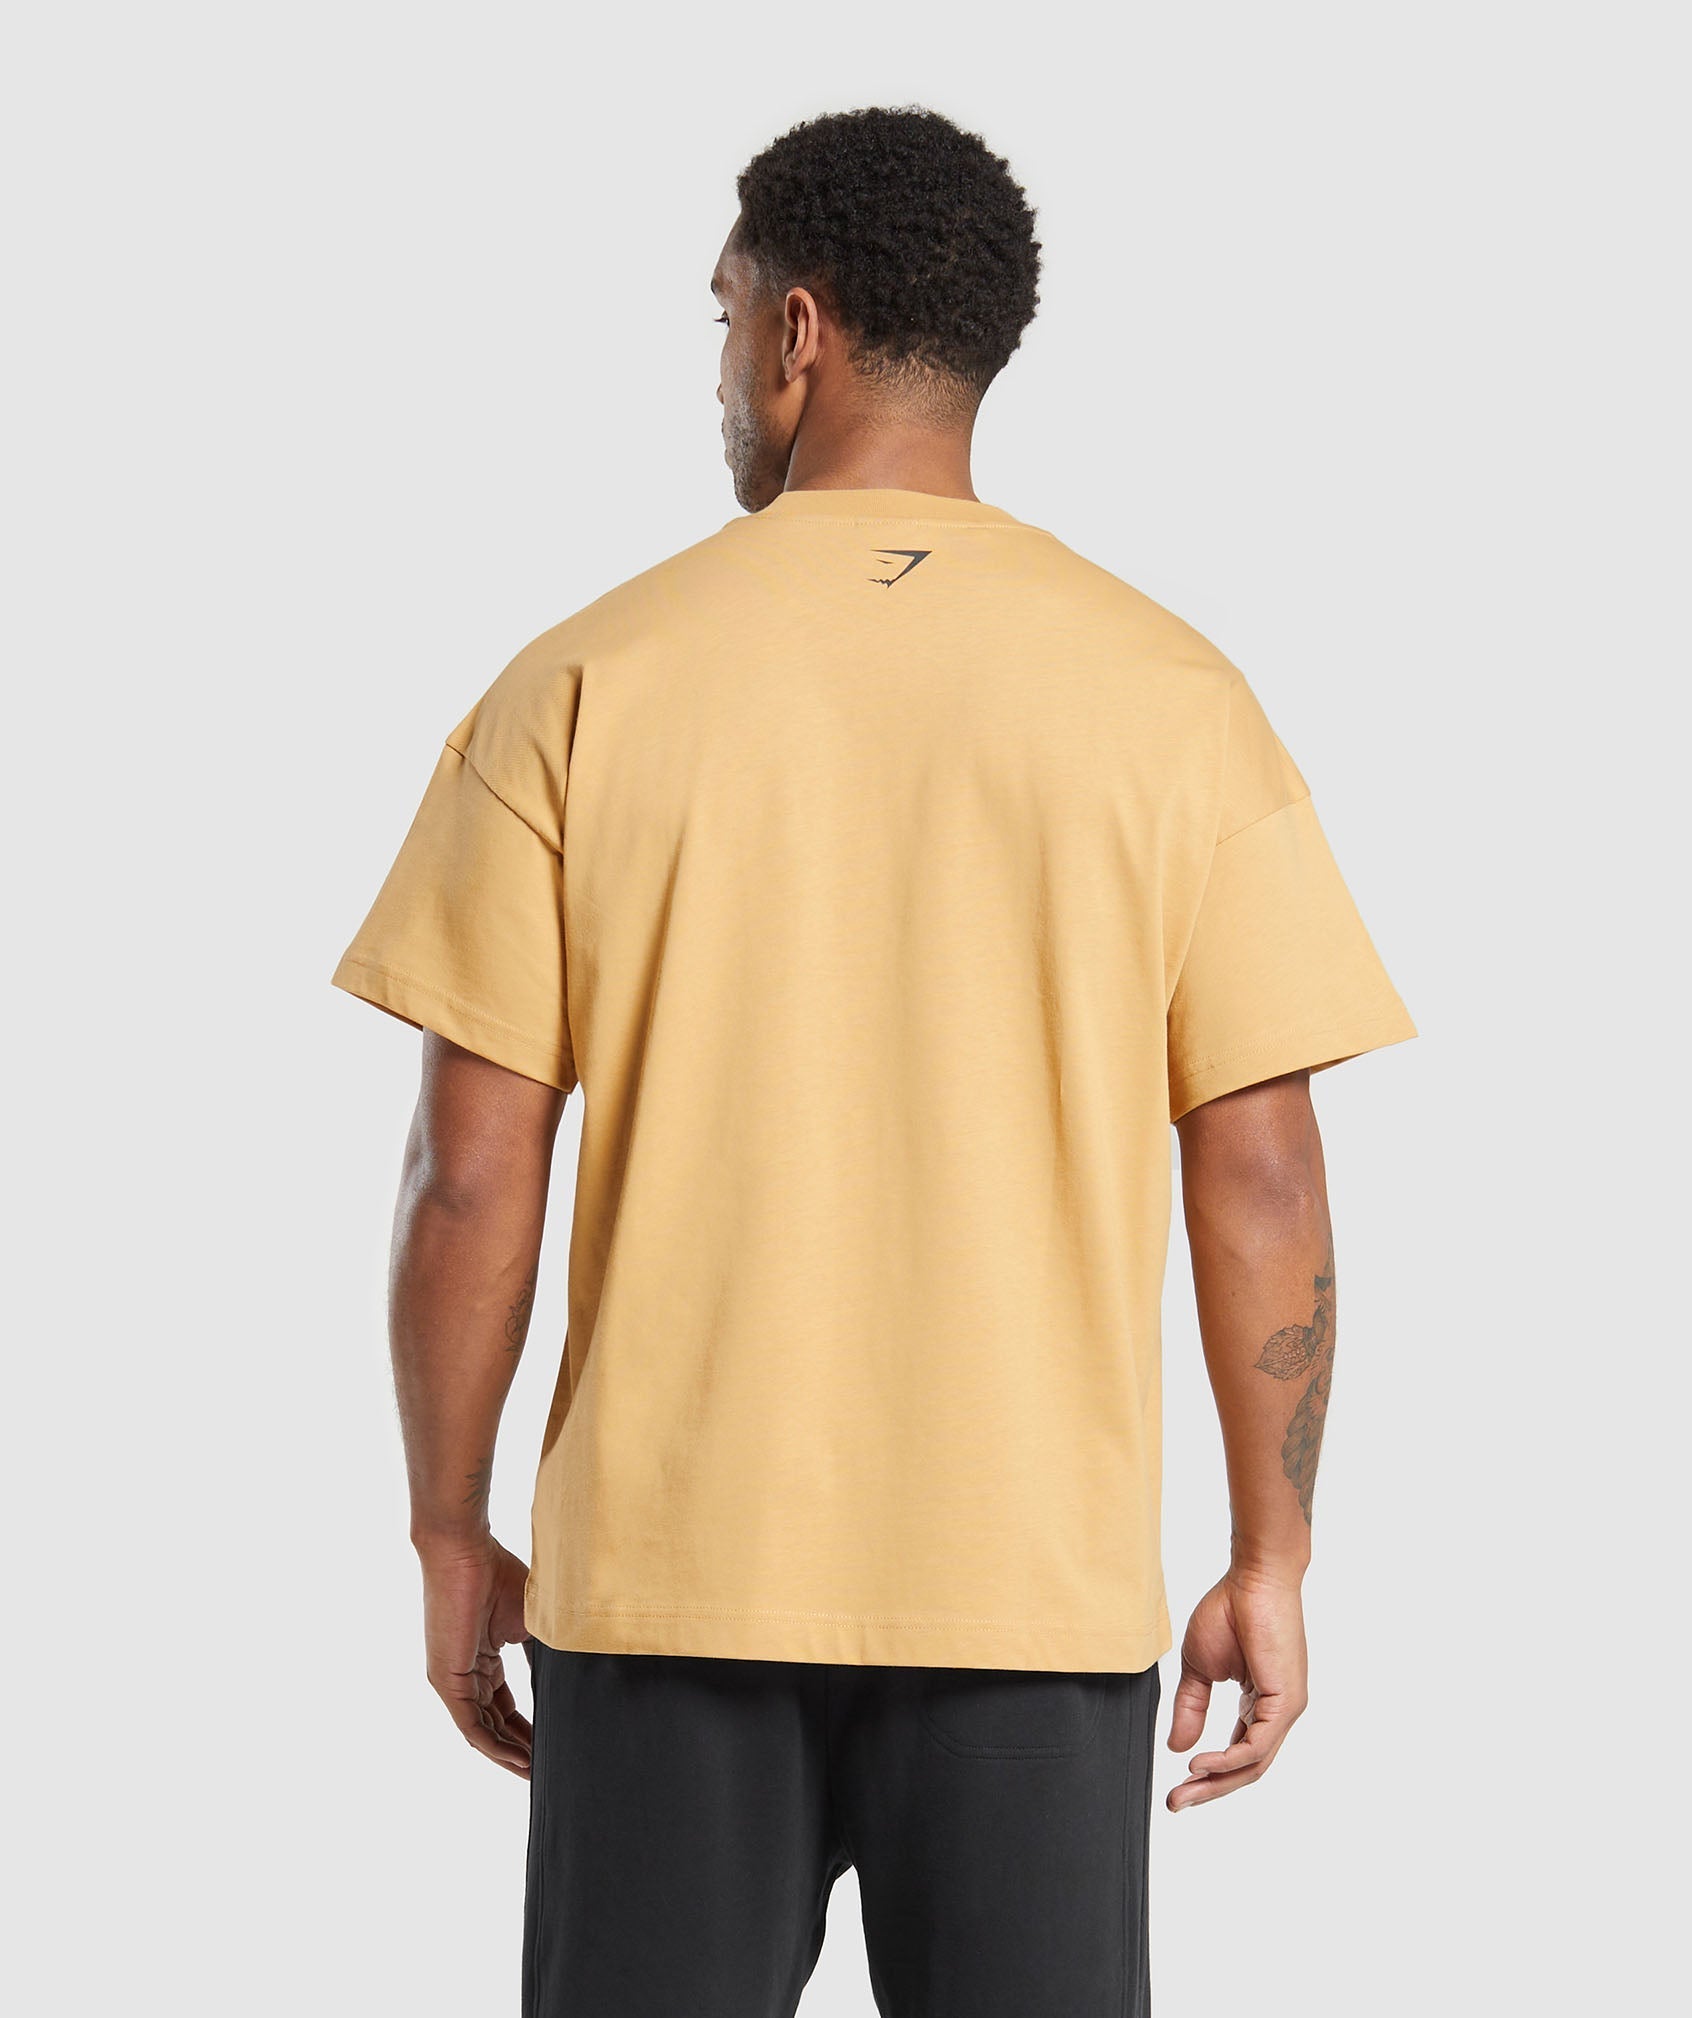 Built in the UK T-Shirt in Rustic Yellow - view 2